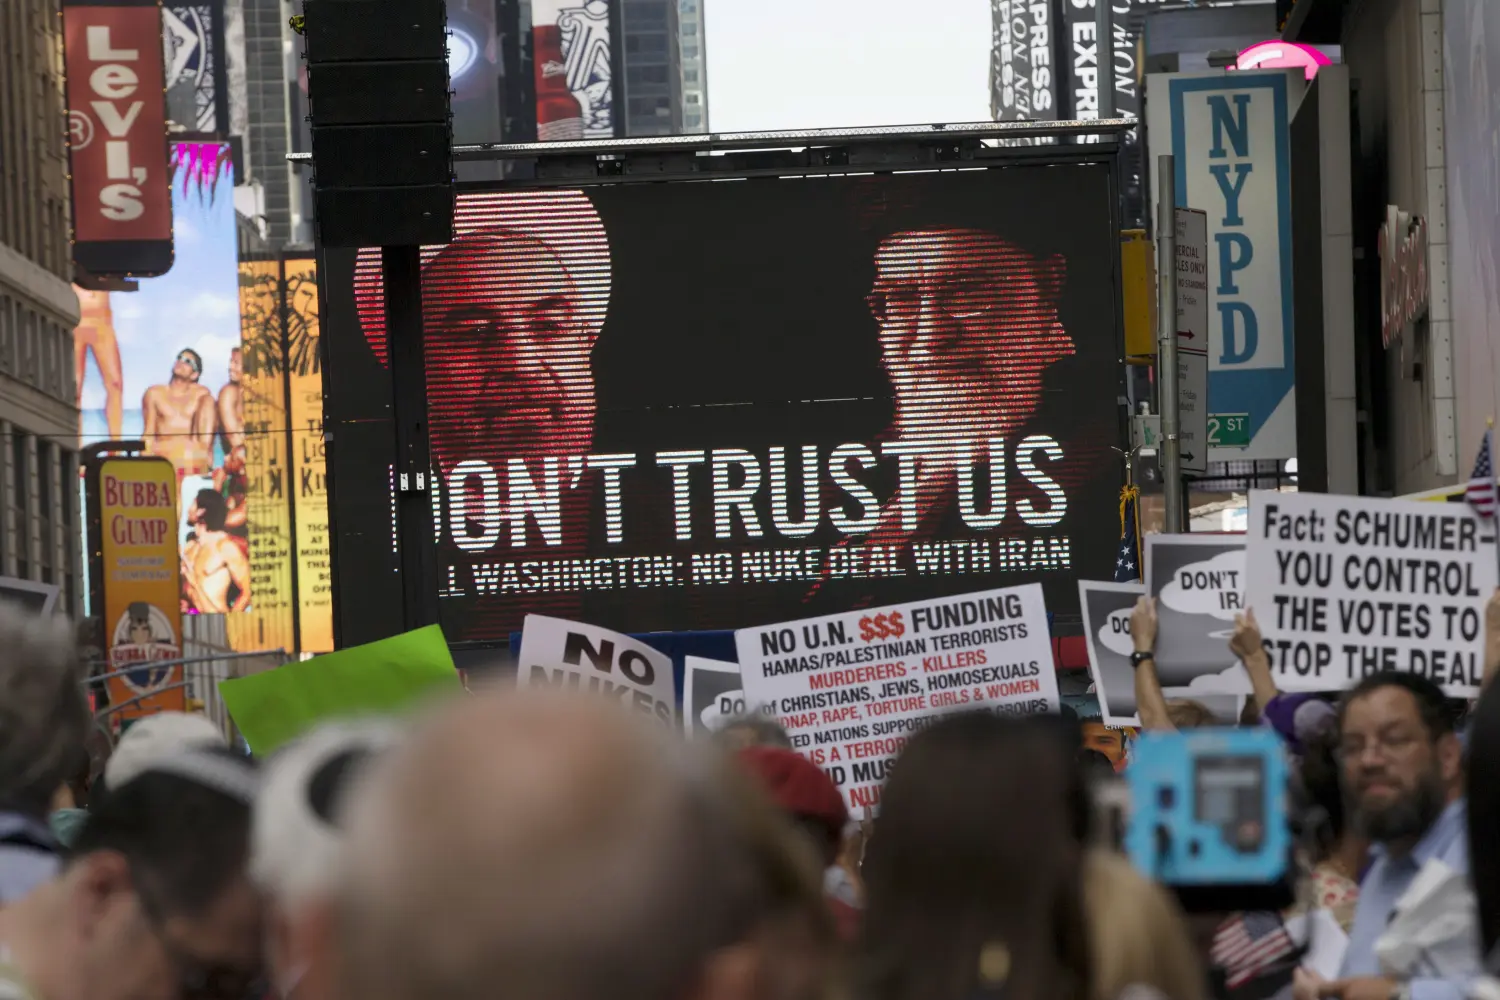 An image of Iranian leaders is projected on a giant screen in front of demonstrators during a rally apposing the nuclear deal with Iran in Times Square in the Manhattan borough of New York City, July 22, 2015. REUTERS/Mike Segar